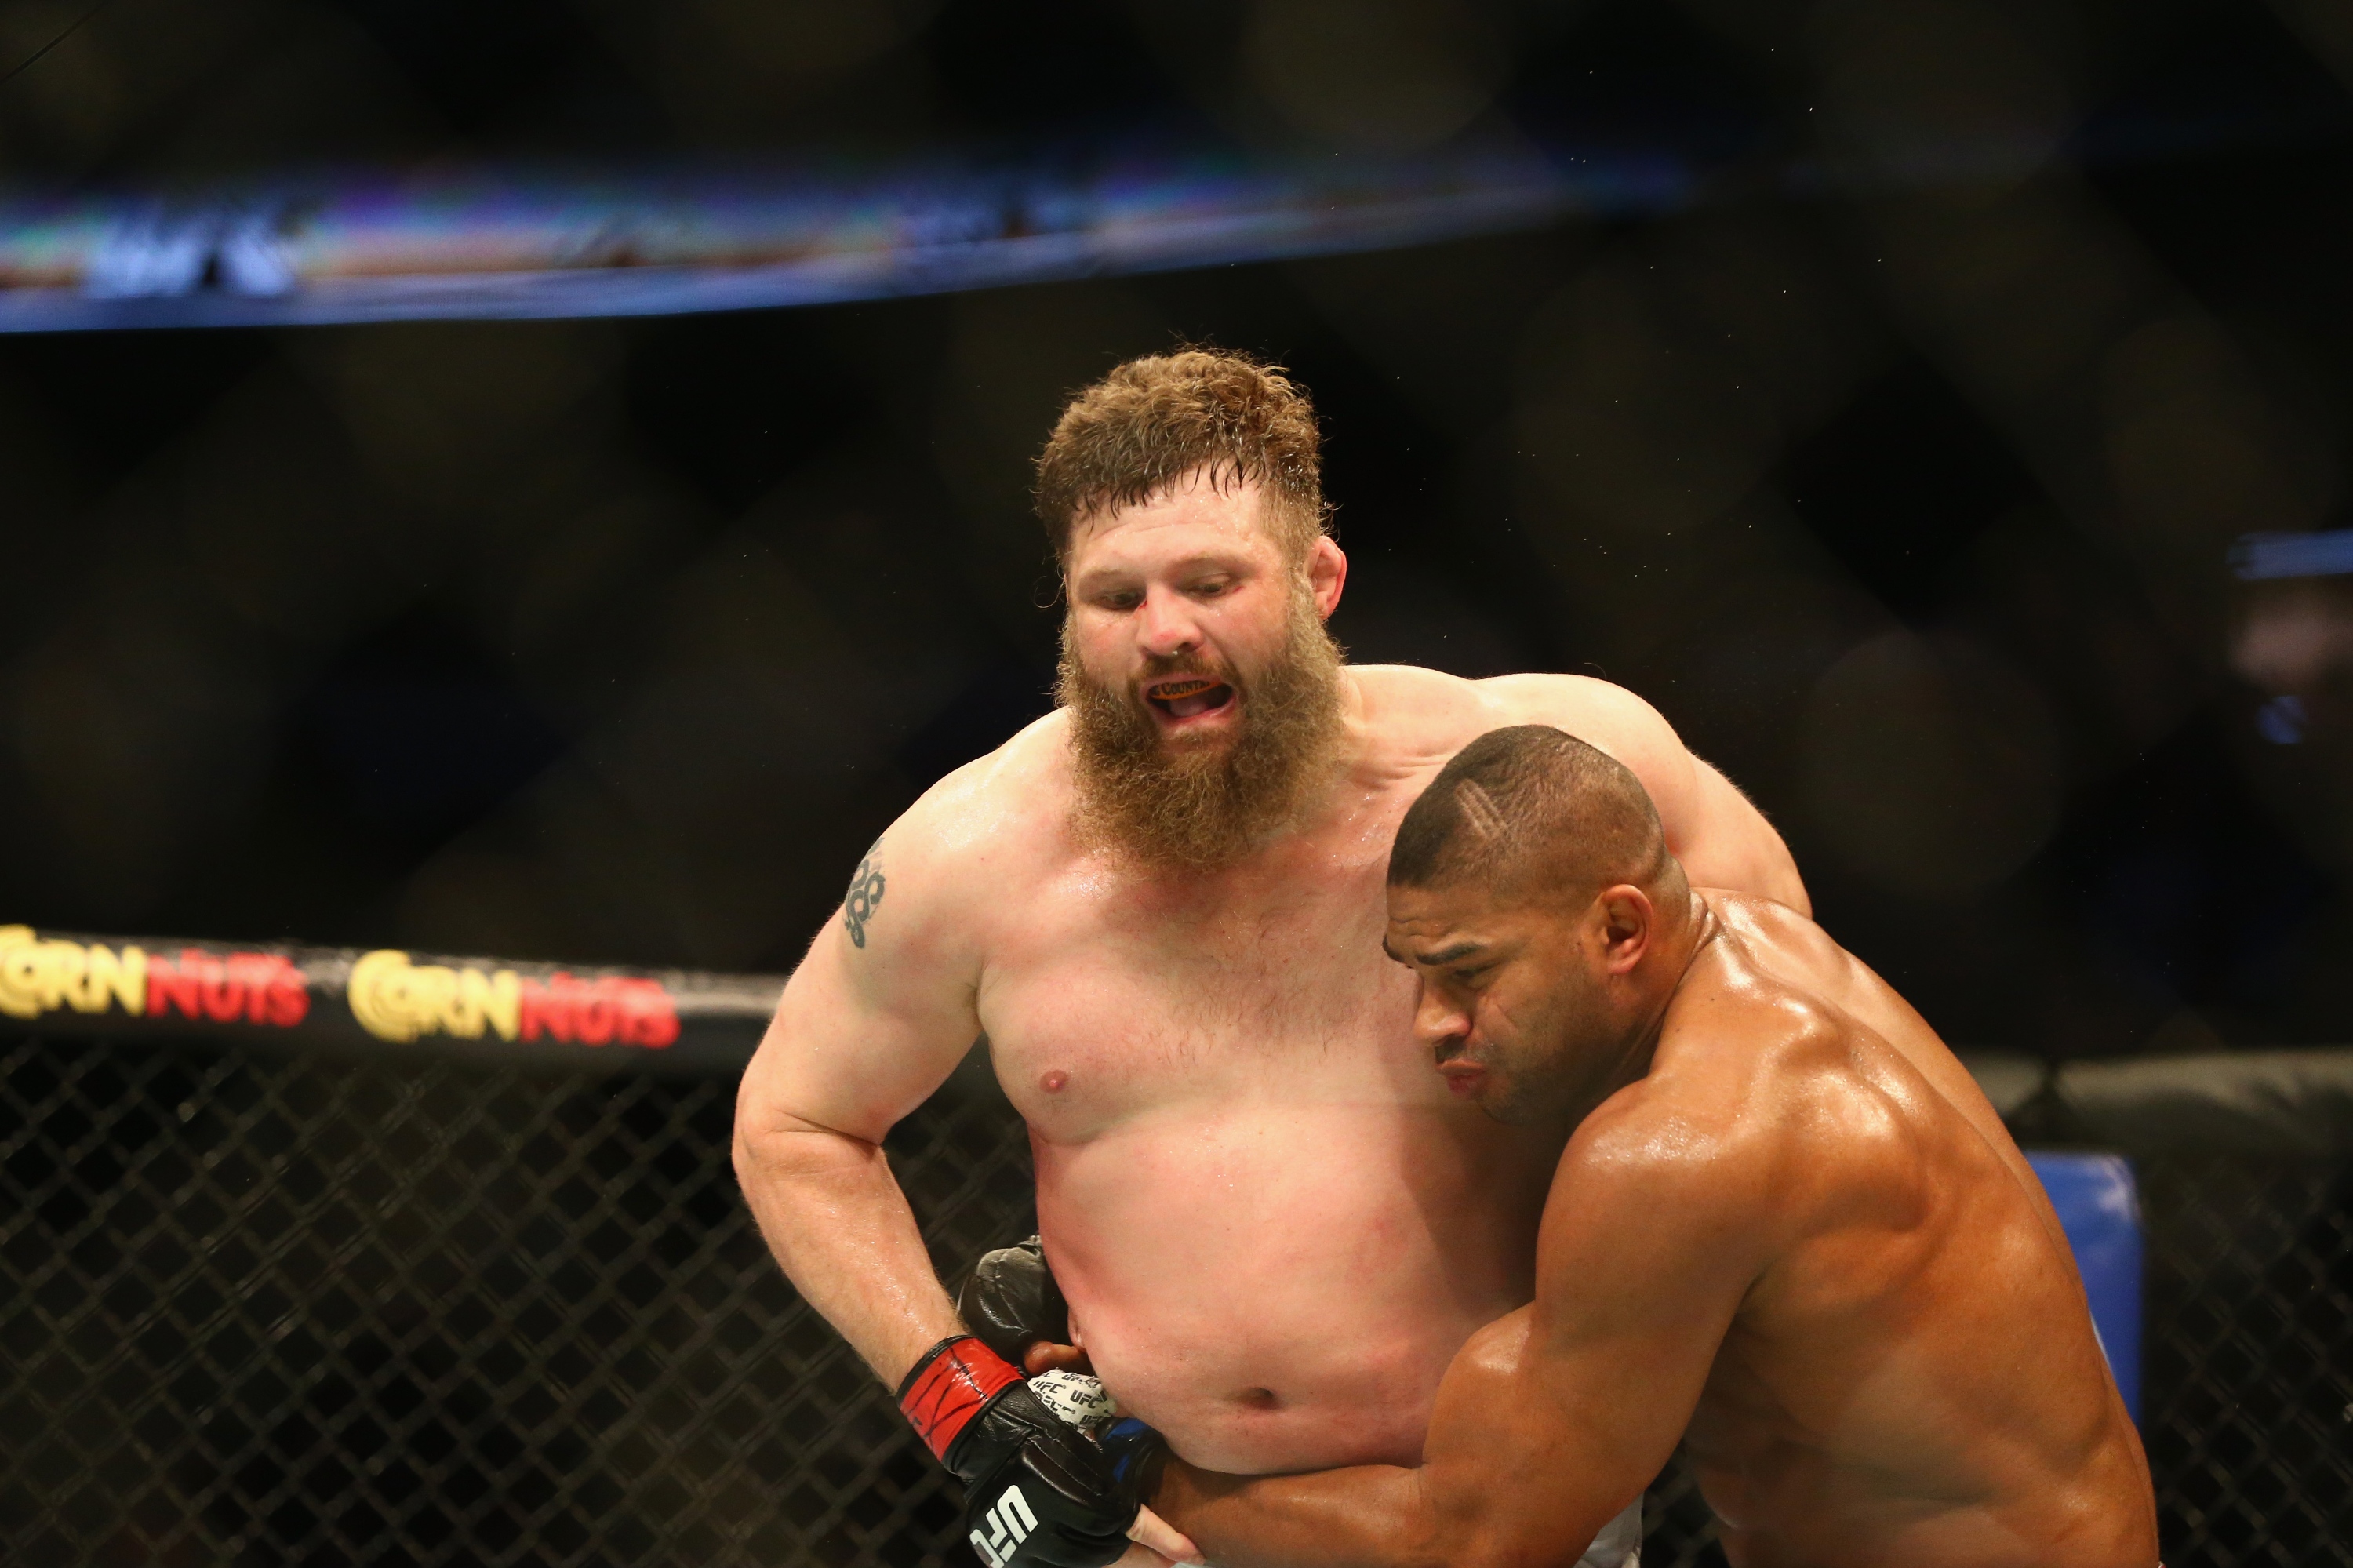 Roy Nelson tries to fend off a takedown during his fight with Alistair Overeem. (Getty)